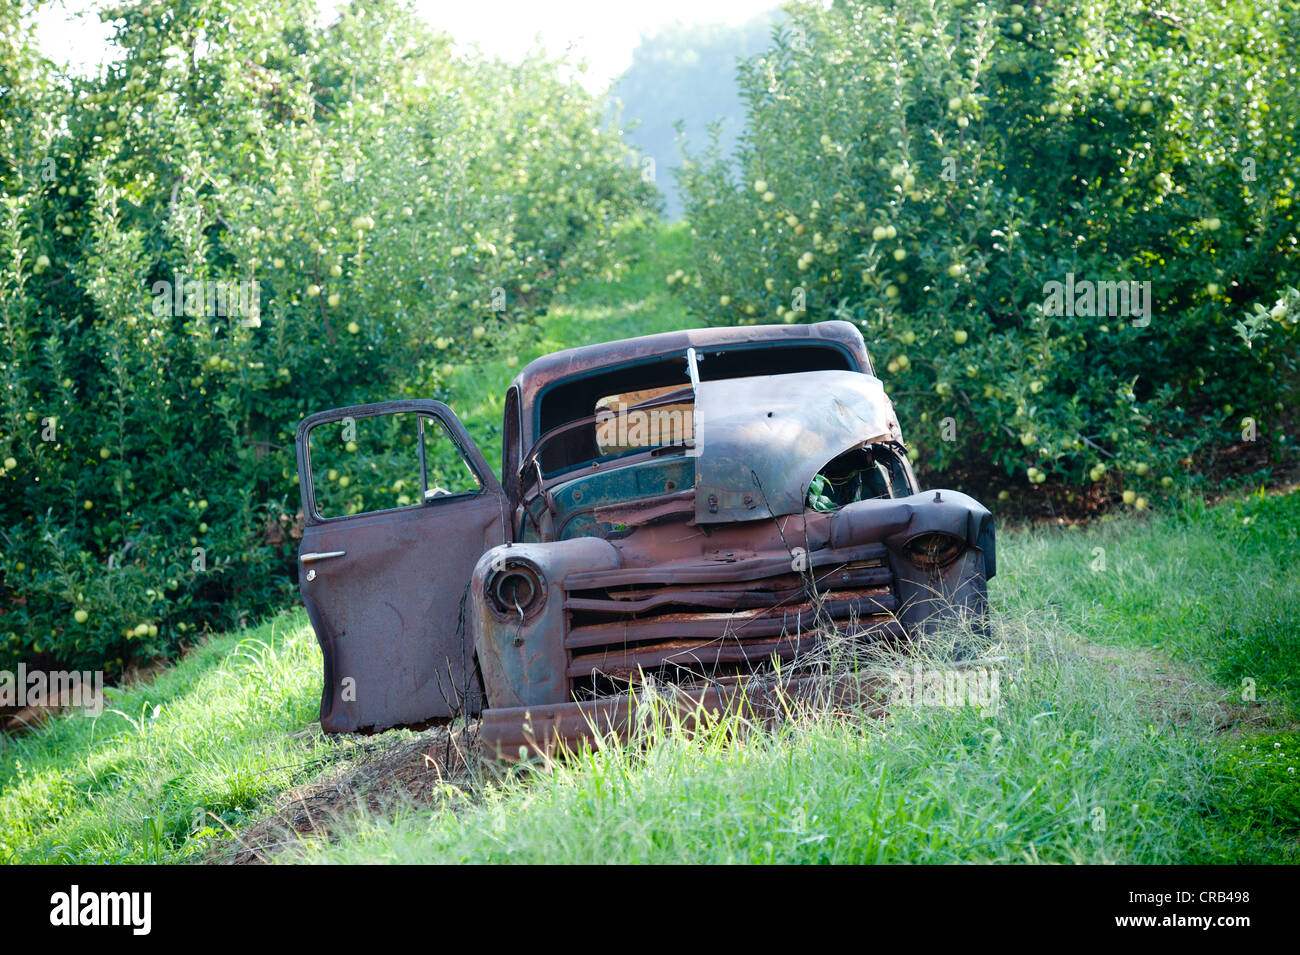 Old rusted out truck abandoned in an apple orchard Stock Photo